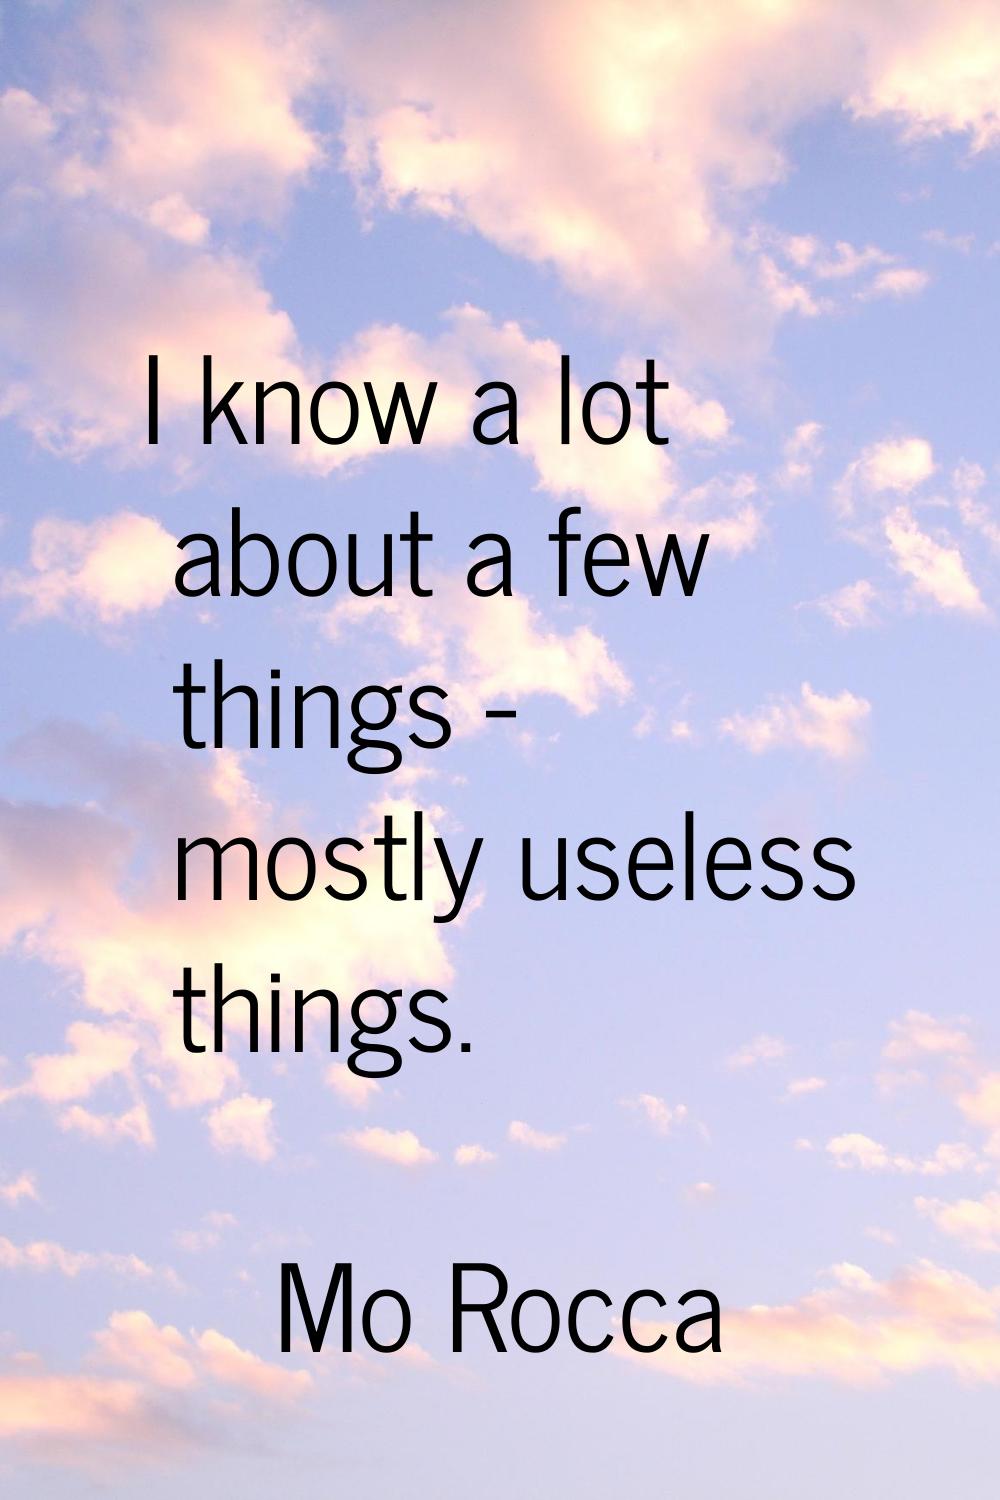 I know a lot about a few things - mostly useless things.